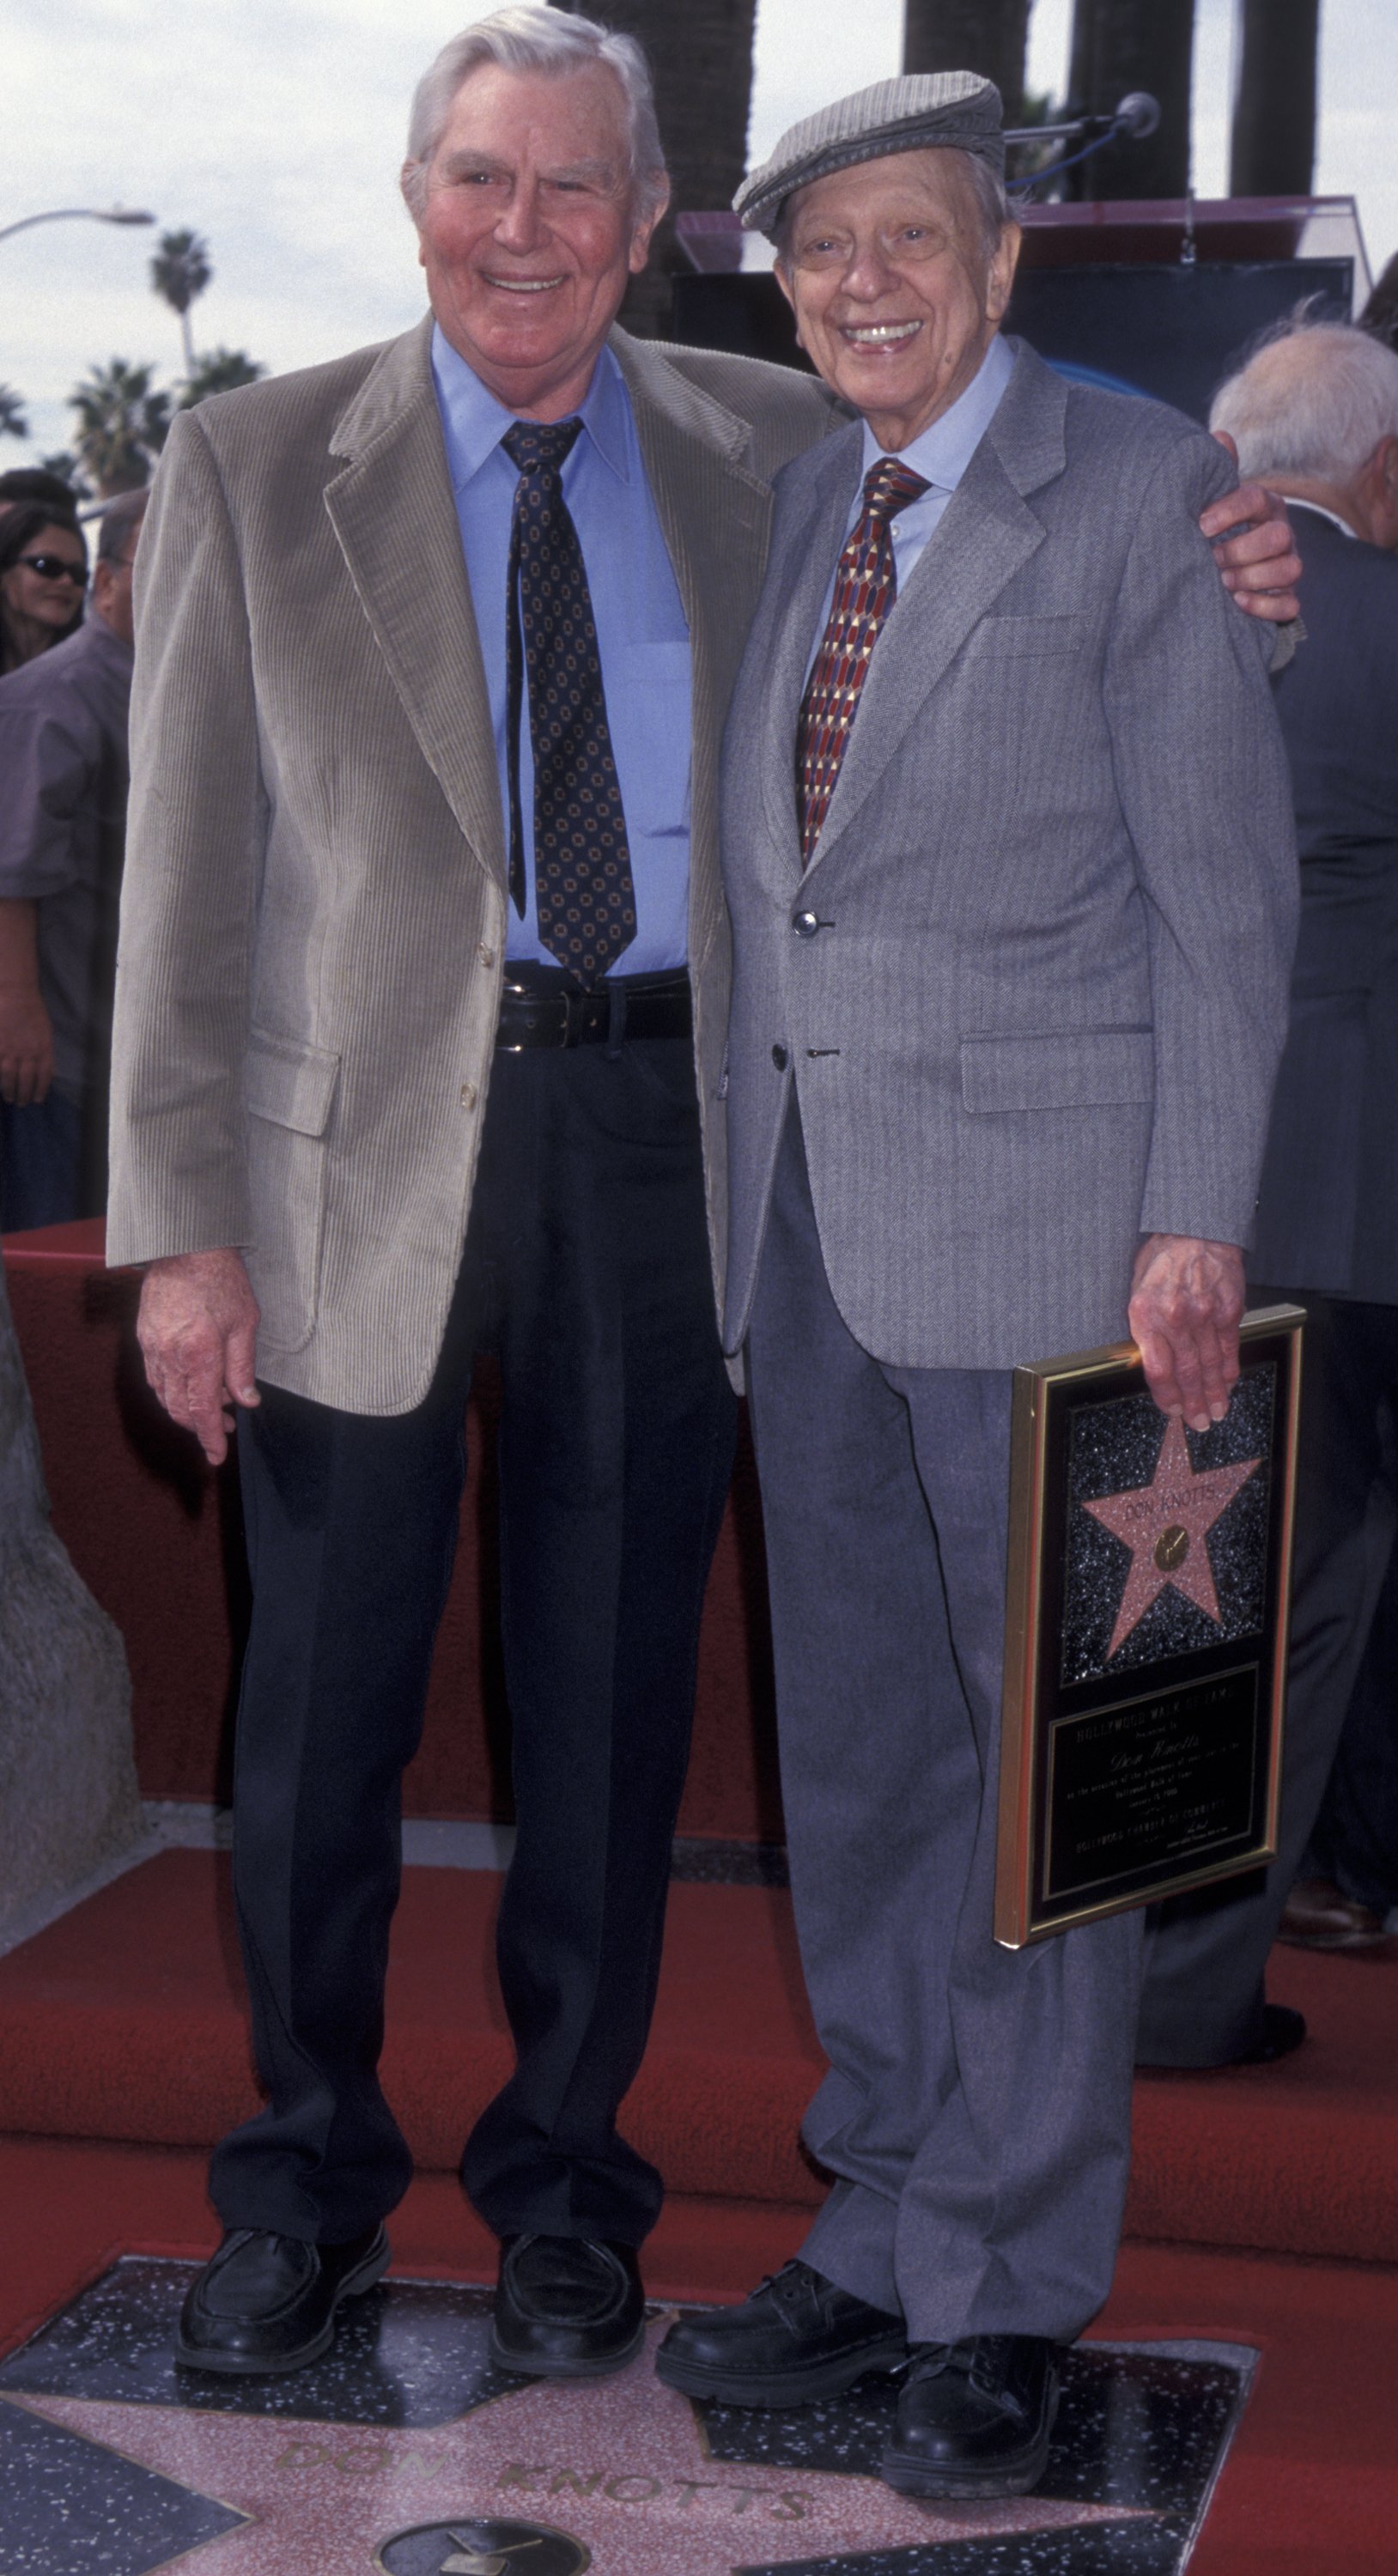 Andy Griffith attends his best friend Don Knotts event in the Hollywood Walk of Fame in 2000. | Photo: Getty Images